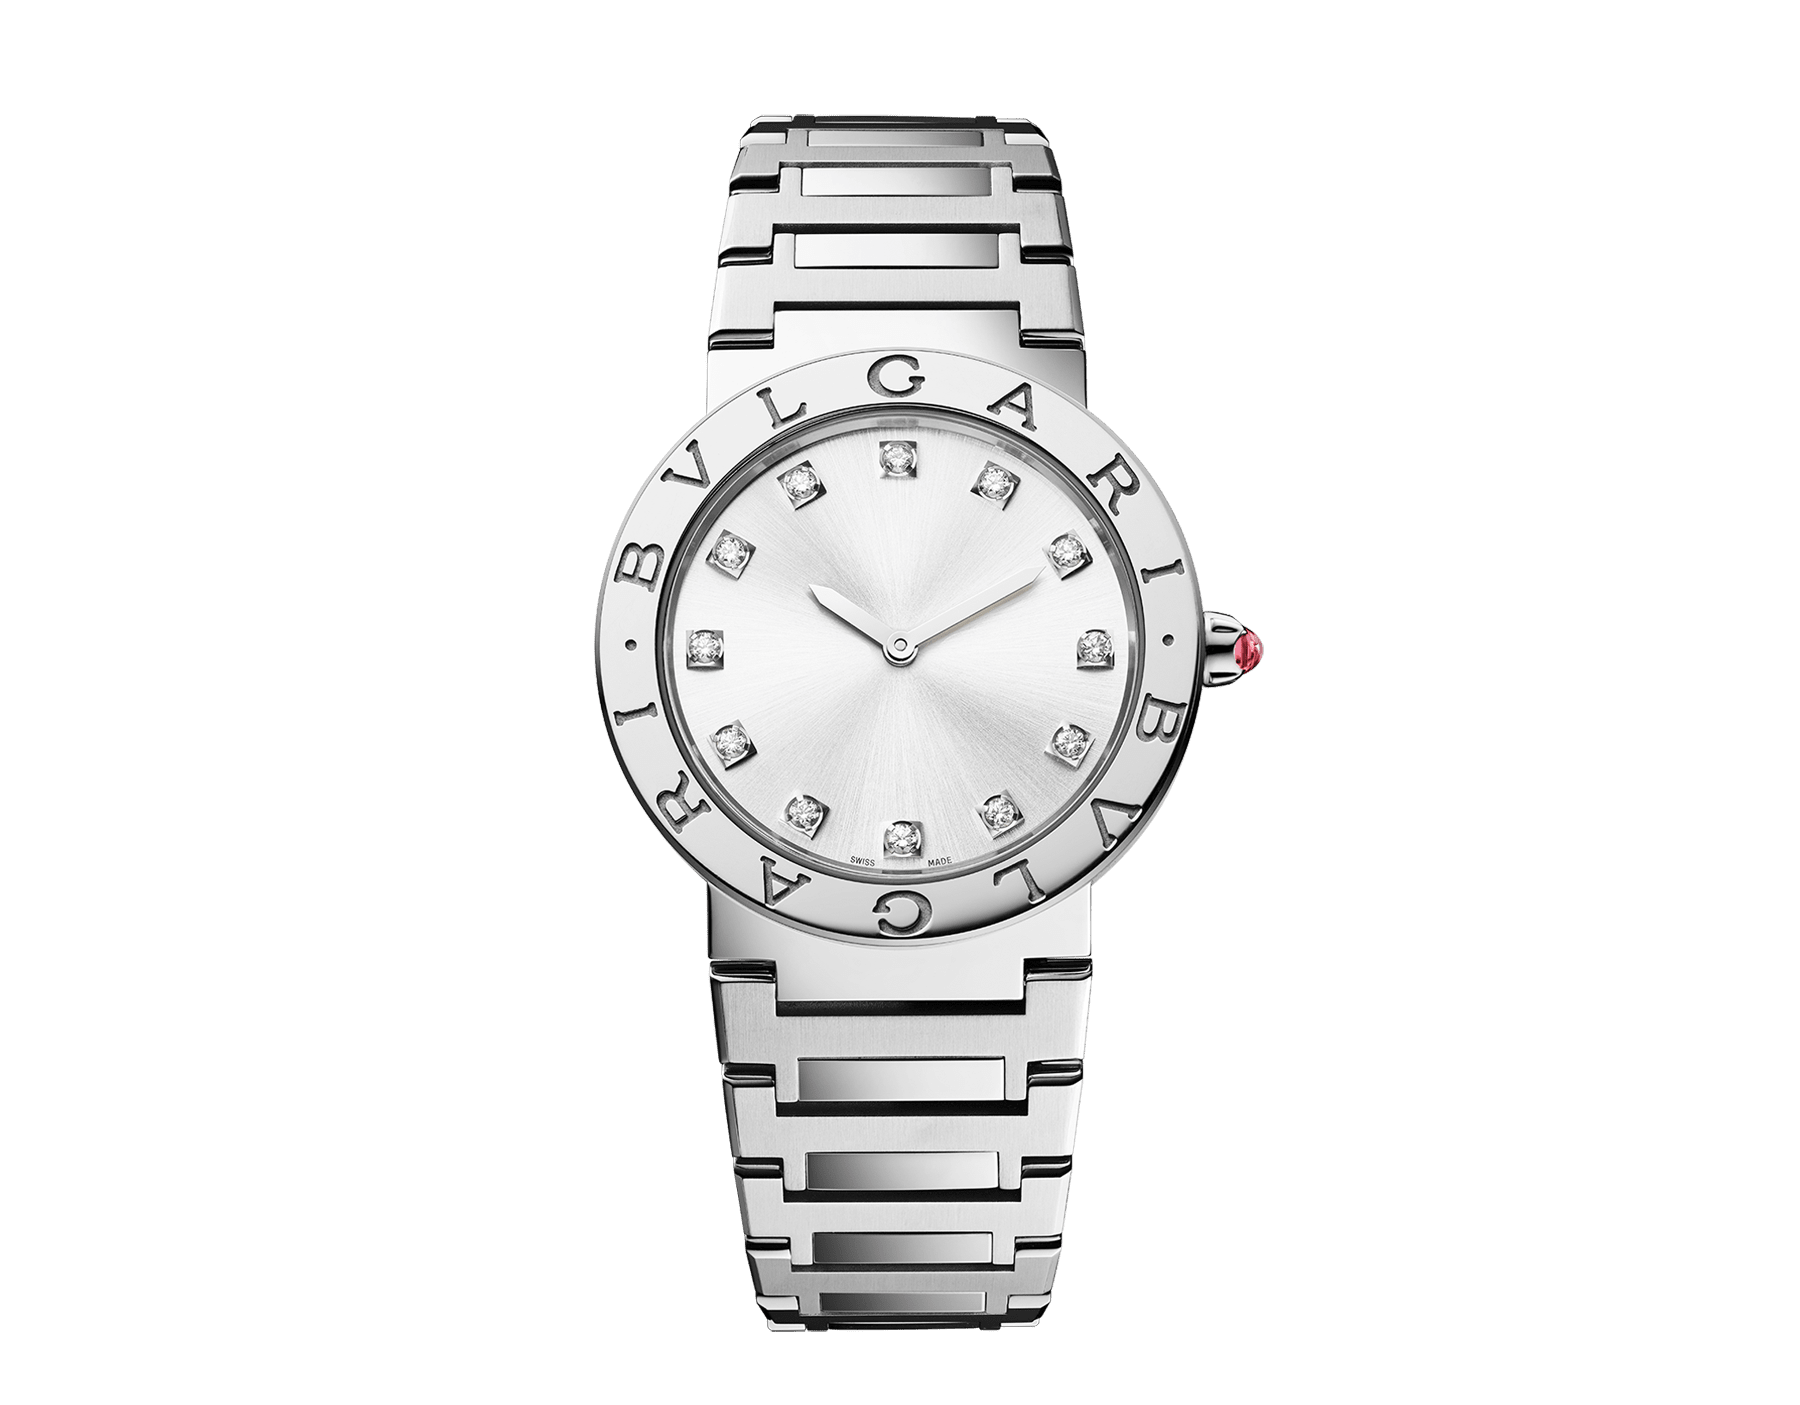 BVLGARI BVLGARI LADY watch with stainless steel case and bracelet, stainless steel bezel engraved with double logo, silver dial and diamond indexes. Water-resistant up to 30 meters 103696 image 1